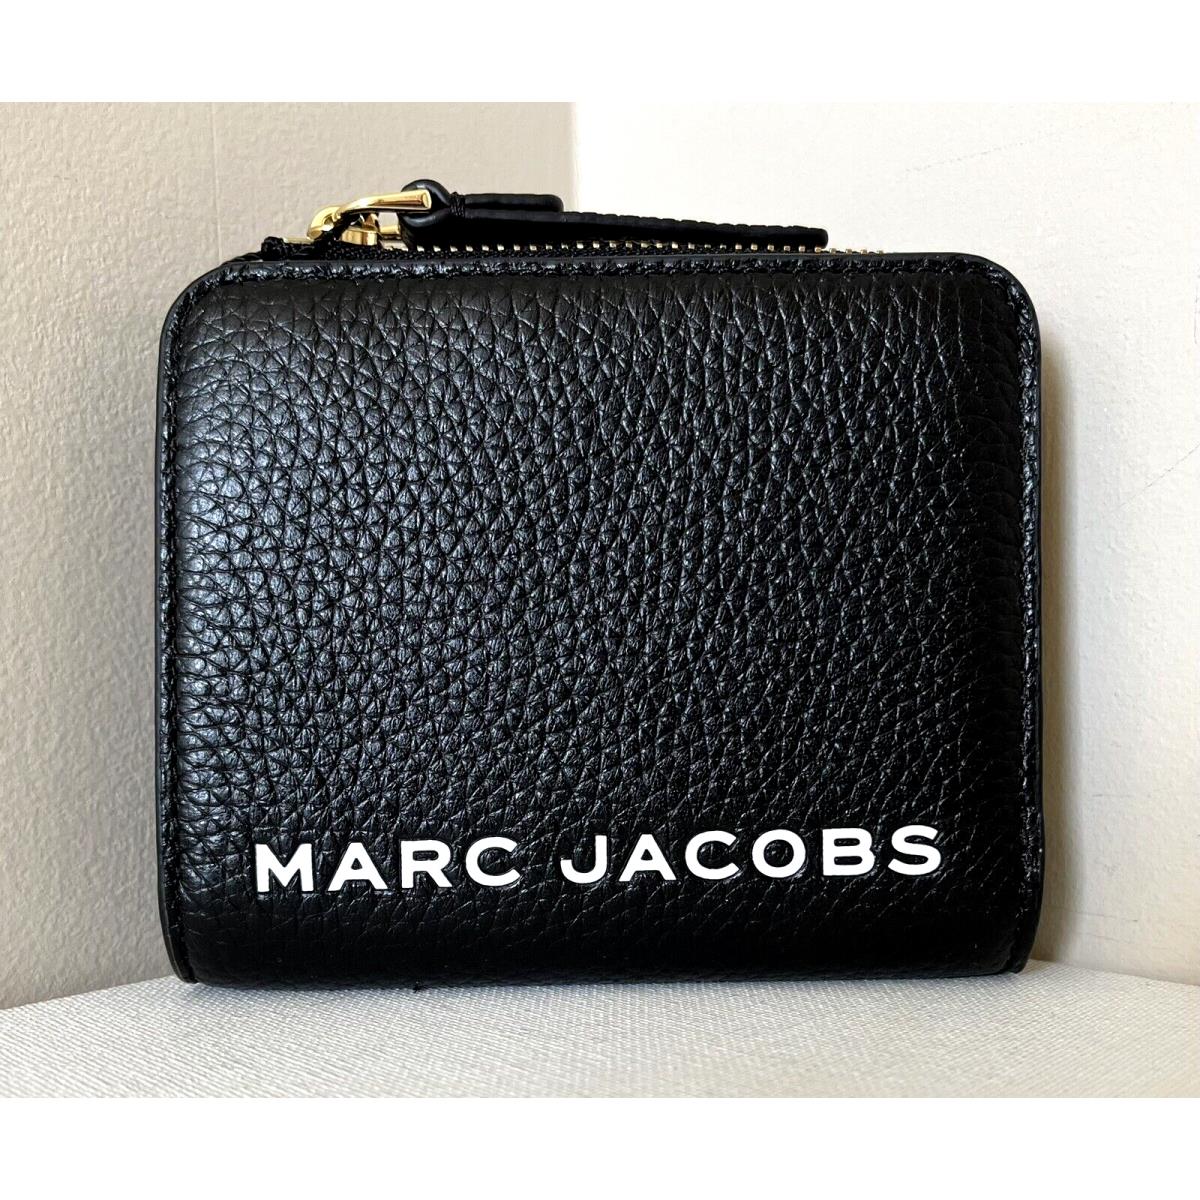 Marc Jacobs Marc Jacobs Compact Bifold Wallet Pebble Leather Black